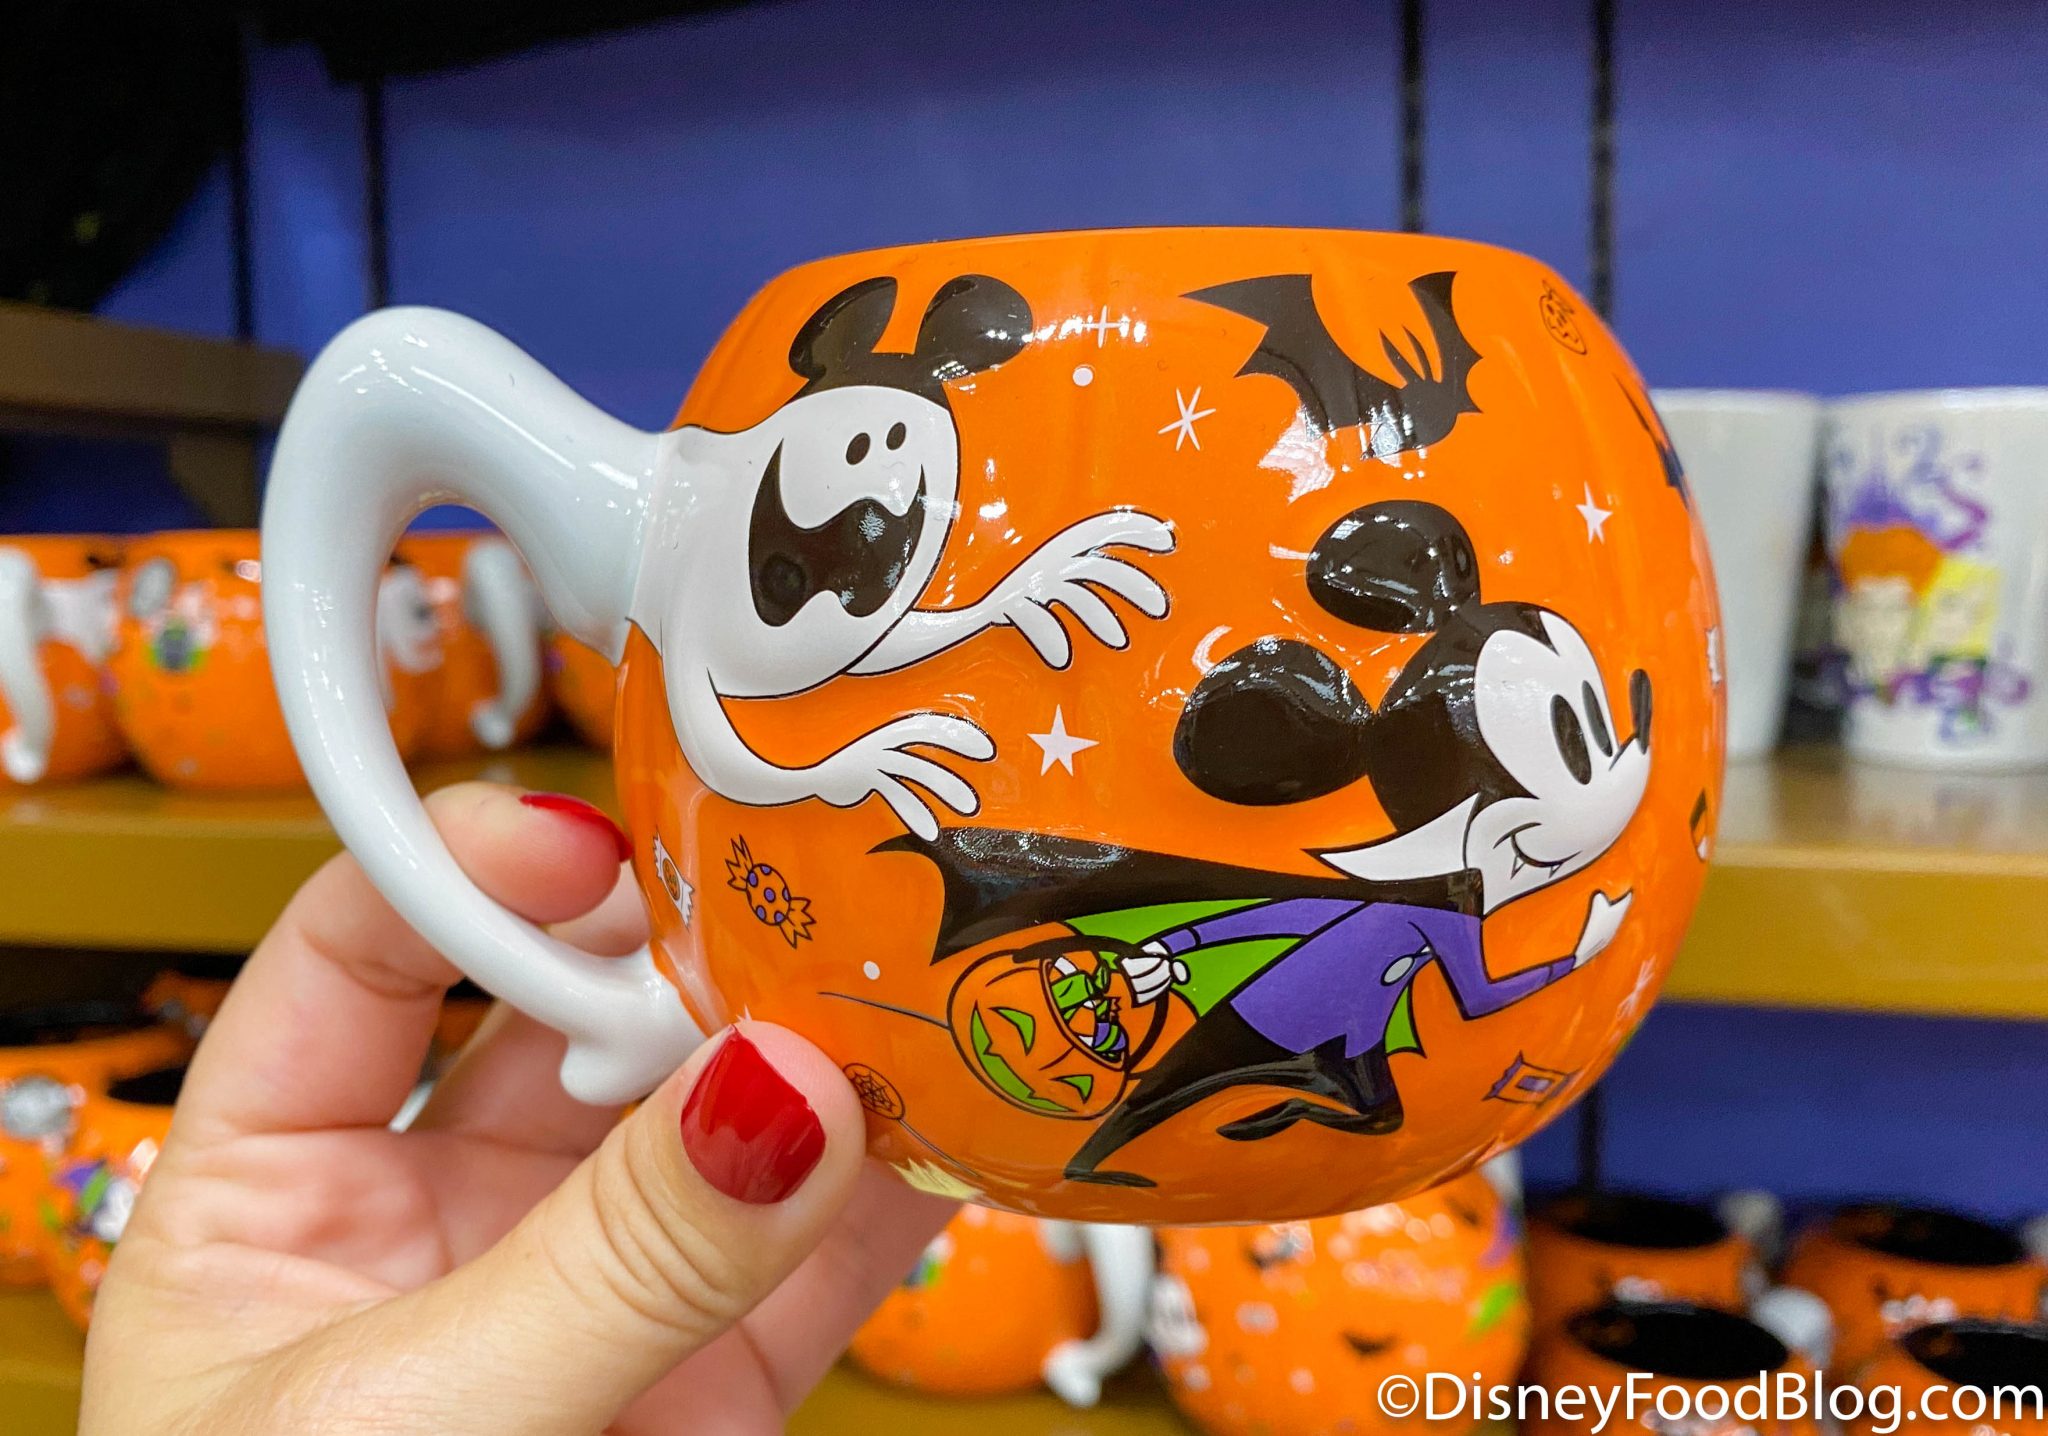 We Found Merchandise For the 2020 Mickey's NotSoScary Halloween Party